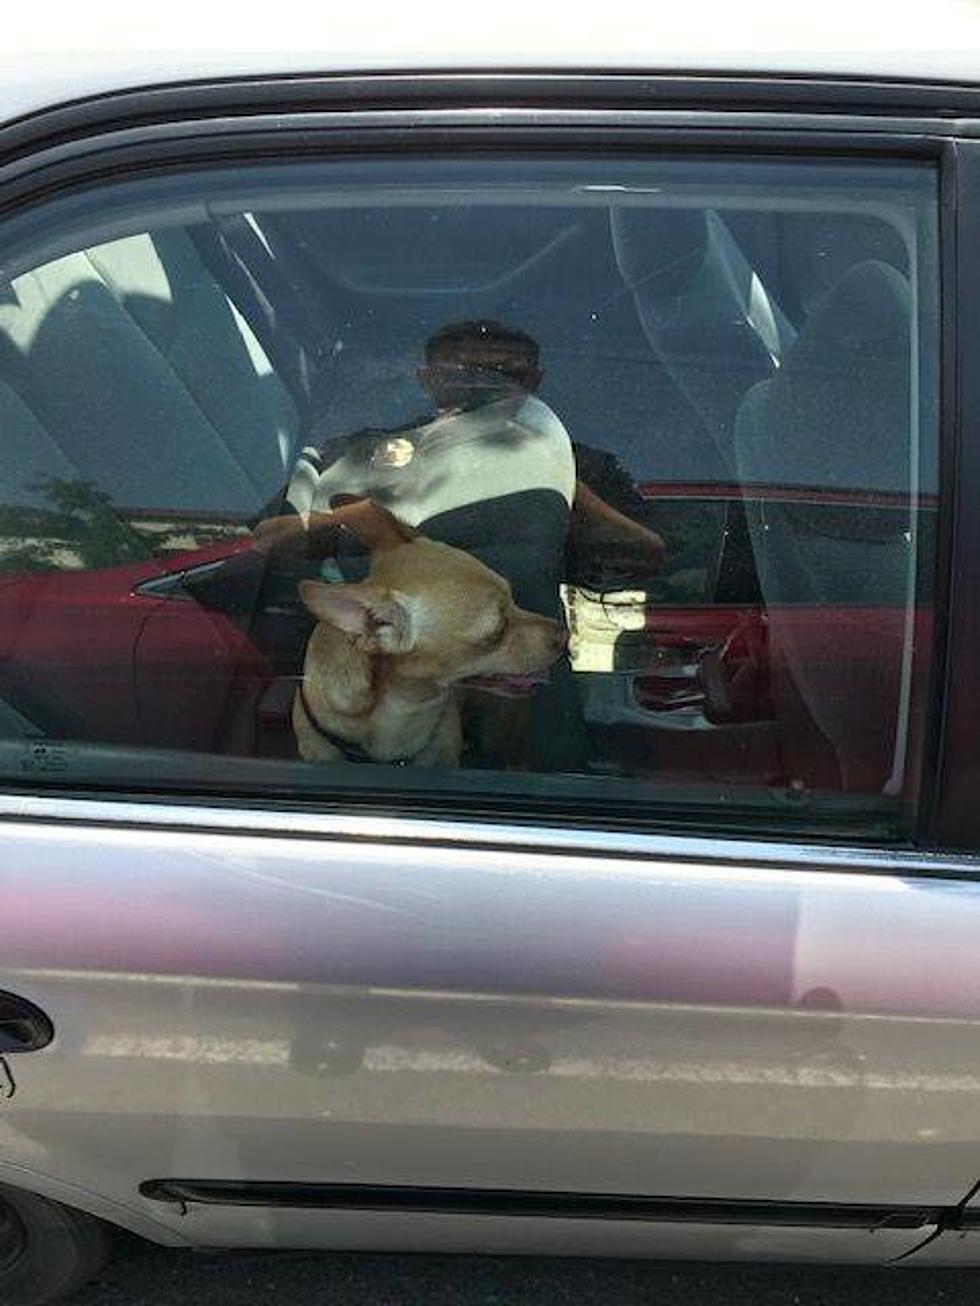 Police Charge Man With Animal Cruelty For Leaving Dog in Hot Car